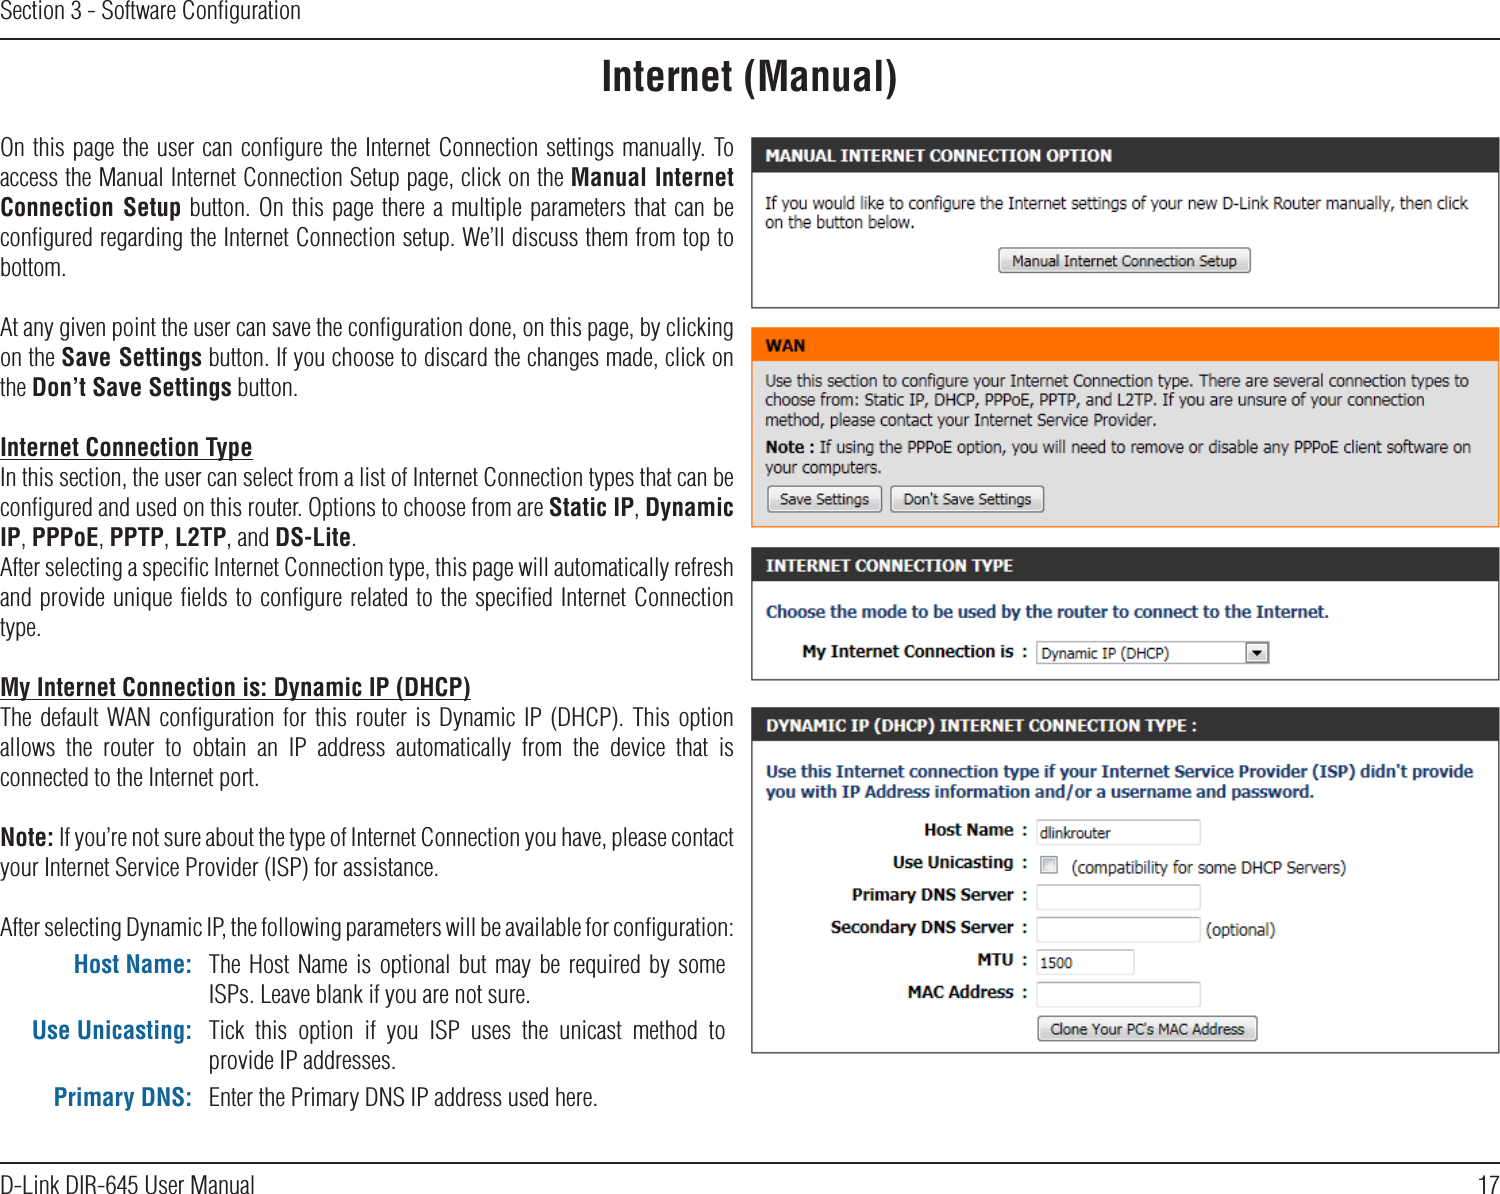 17D-Link DIR-645 User ManualSection 3 - Software ConﬁgurationInternet (Manual)On this page the user can conﬁgure the Internet Connection settings manually. To access the Manual Internet Connection Setup page, click on the Manual Internet Connection Setup button. On  this page there  a multiple parameters that can be conﬁgured regarding the Internet Connection setup. We’ll discuss them from top to bottom.At any given point the user can save the conﬁguration done, on this page, by clicking on the Save Settings button. If you choose to discard the changes made, click on the Don’t Save Settings button.Internet Connection TypeIn this section, the user can select from a list of Internet Connection types that can be conﬁgured and used on this router. Options to choose from are Static IP, Dynamic IP, PPPoE, PPTP, L2TP, and DS-Lite.After selecting a speciﬁc Internet Connection type, this page will automatically refresh and provide unique ﬁelds to conﬁgure related to the speciﬁed Internet Connection type.My Internet Connection is: Dynamic IP (DHCP)The default WAN conﬁguration  for  this  router  is  Dynamic  IP  (DHCP).  This  option allows  the  router  to  obtain  an  IP  address  automatically  from  the  device  that  is connected to the Internet port. Note: If you’re not sure about the type of Internet Connection you have, please contact your Internet Service Provider (ISP) for assistance.After selecting Dynamic IP, the following parameters will be available for conﬁguration:Host Name: The  Host  Name  is optional but may be required by  some ISPs. Leave blank if you are not sure.Use Unicasting: Tick  this  option  if  you  ISP  uses  the  unicast  method  to provide IP addresses.Primary DNS: Enter the Primary DNS IP address used here.